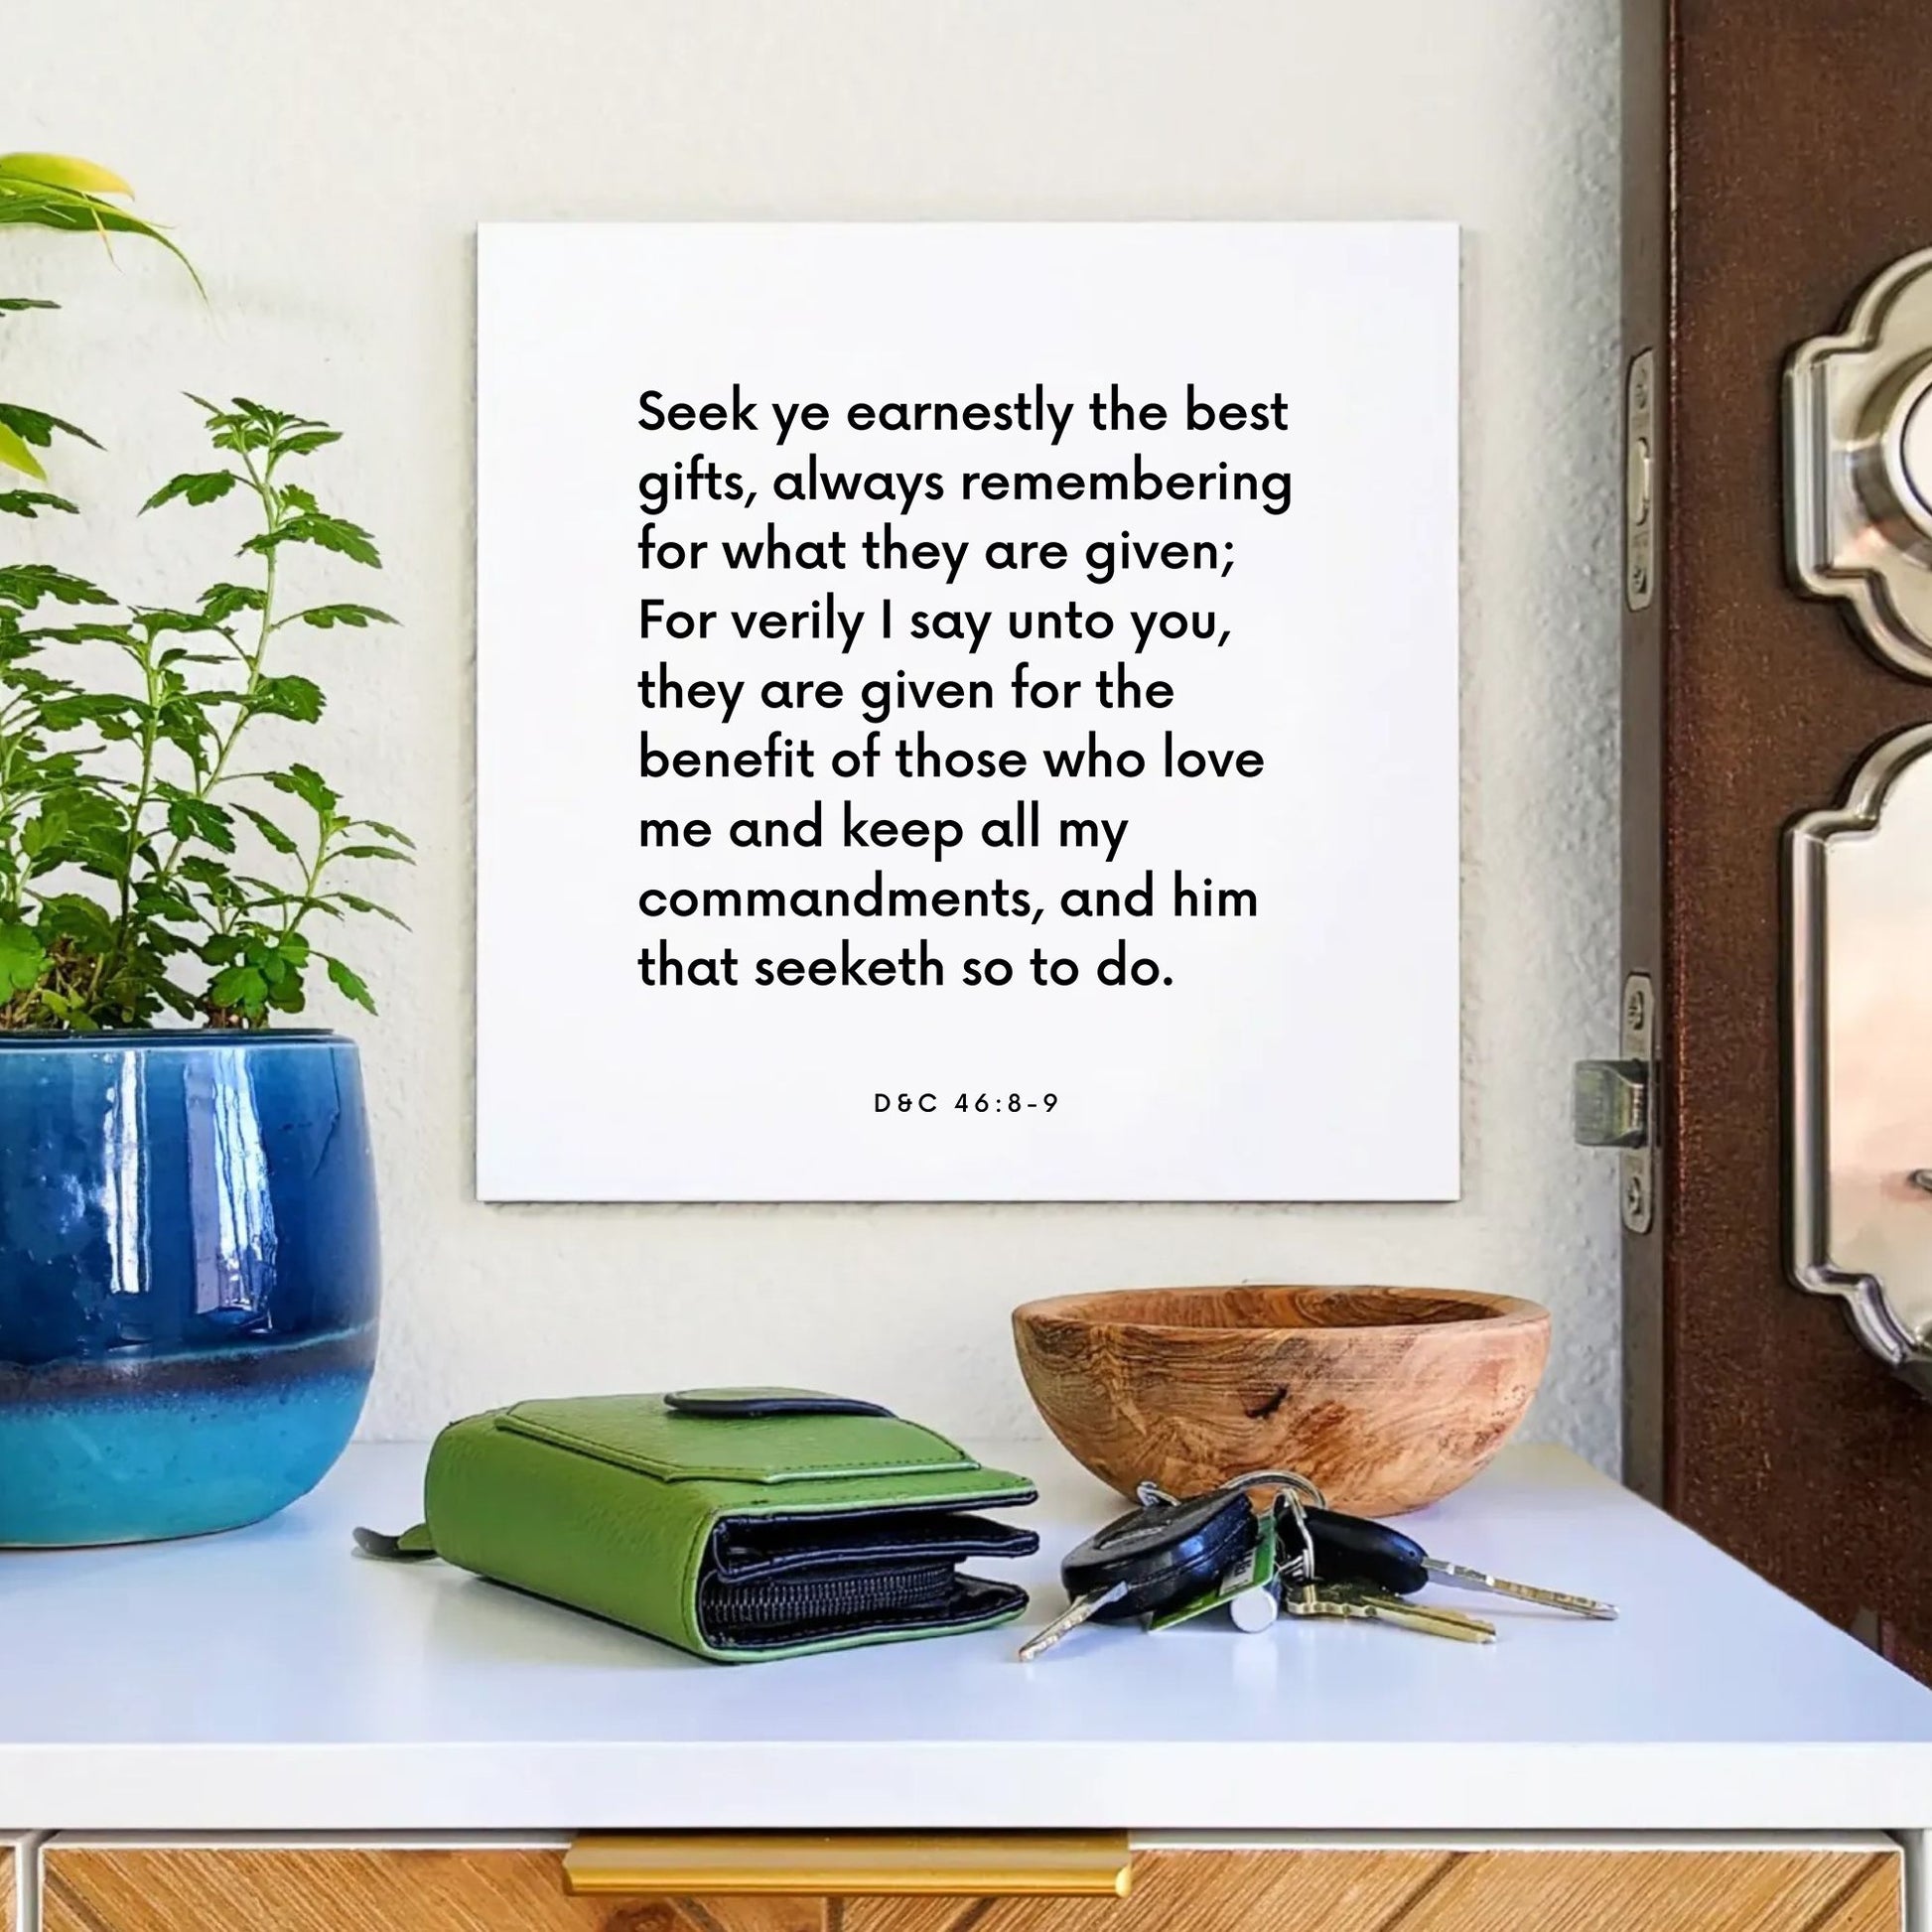 Entryway mouting of the scripture tile for D&C 46:8-9 - "Seek ye earnestly the best gifts"